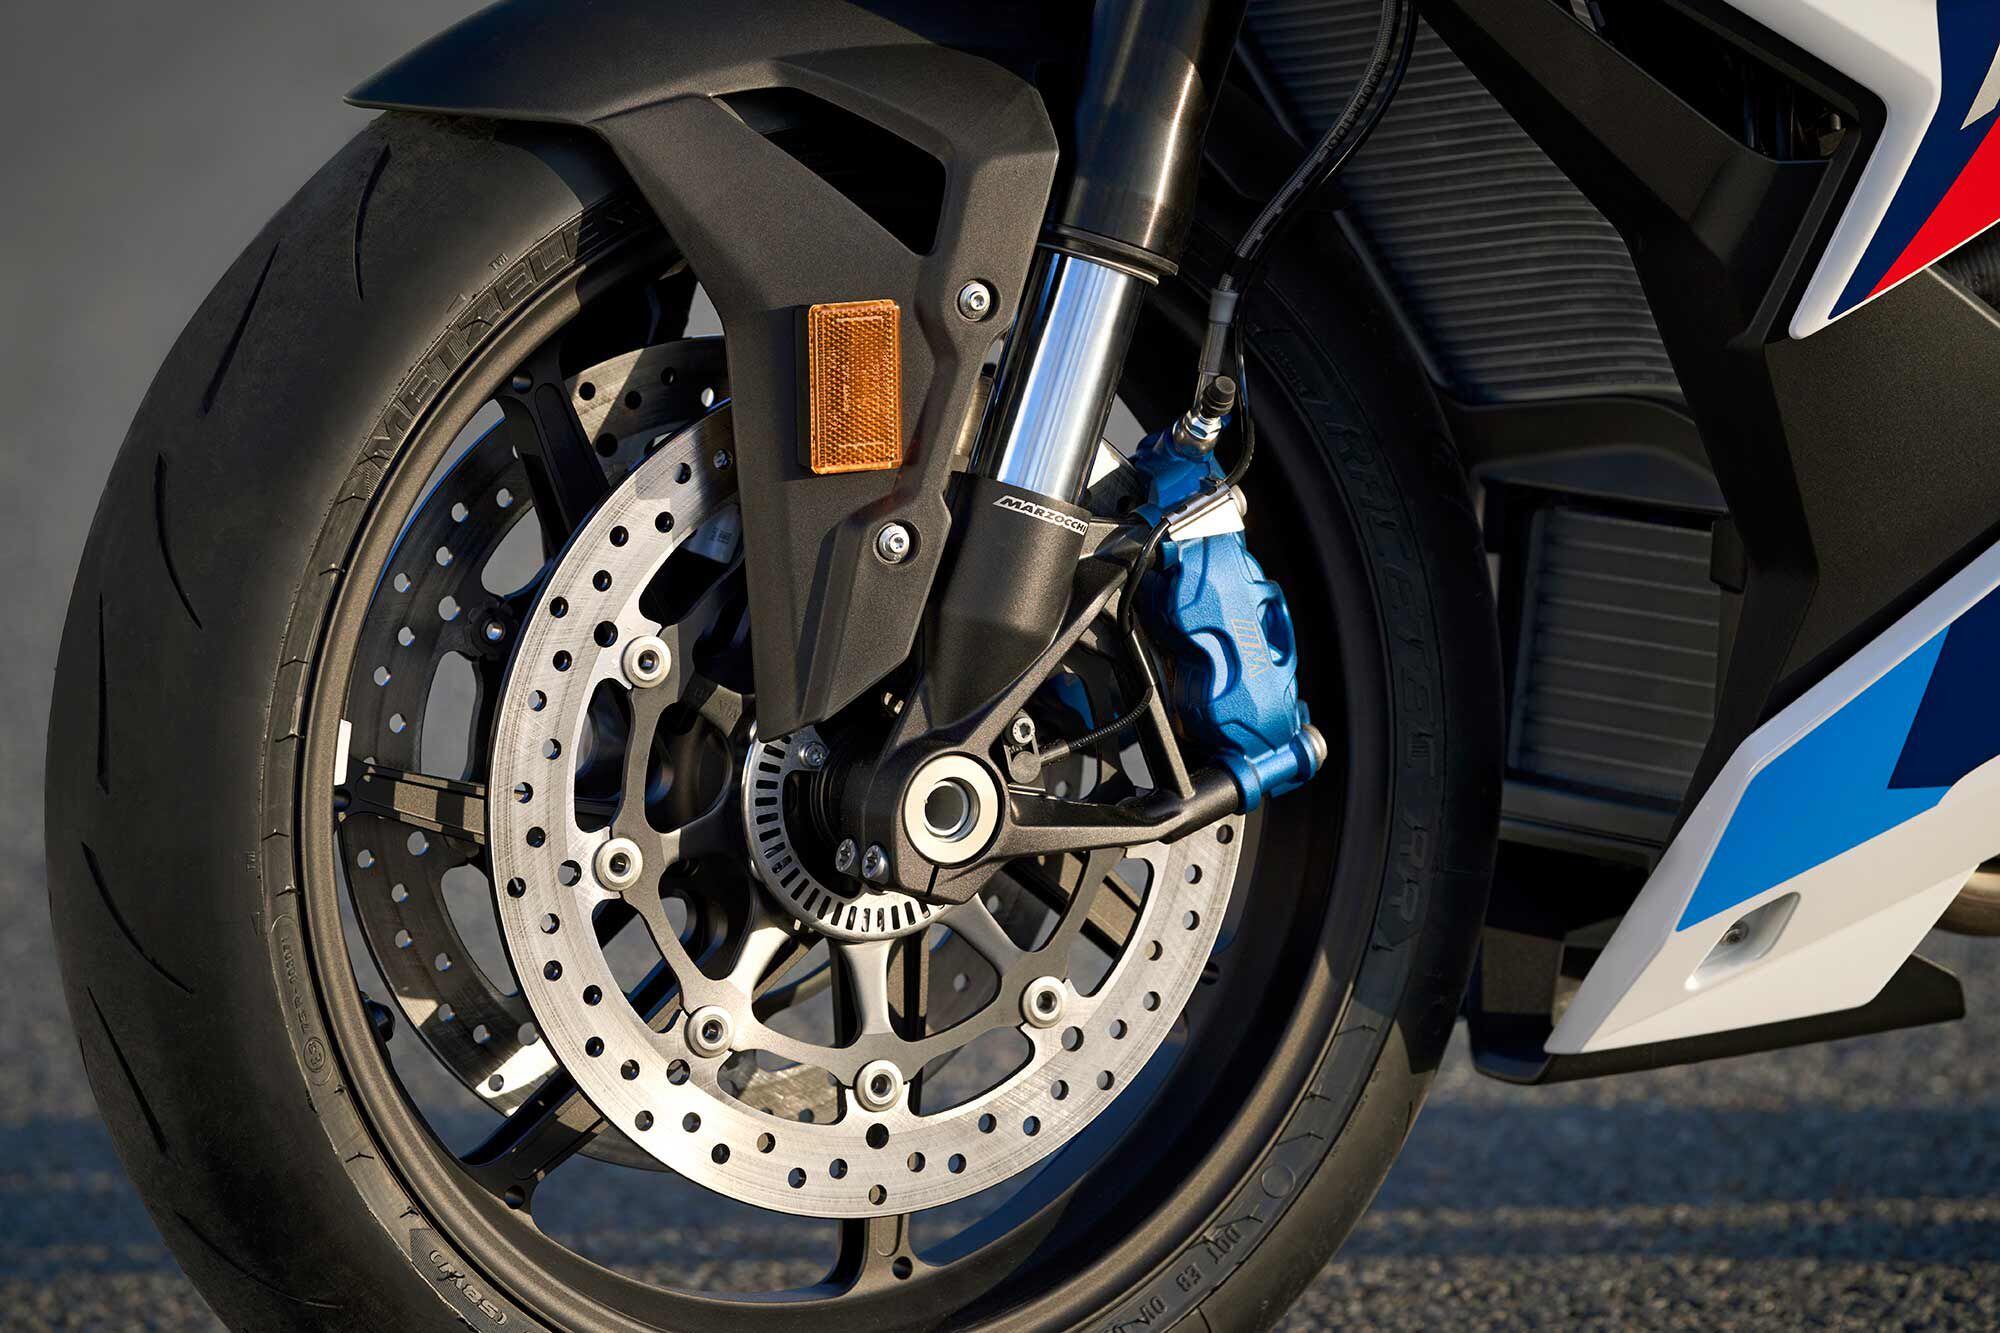 The front of the M 1000 R is highlighted by the 45mm Marzocchi fork on which hangs blue-anodized Nissin radial-mount four-piston brake calipers pinching 320mm discs. The standard wheels on the M are forged aluminum units. Carbon fiber wheels are an option.